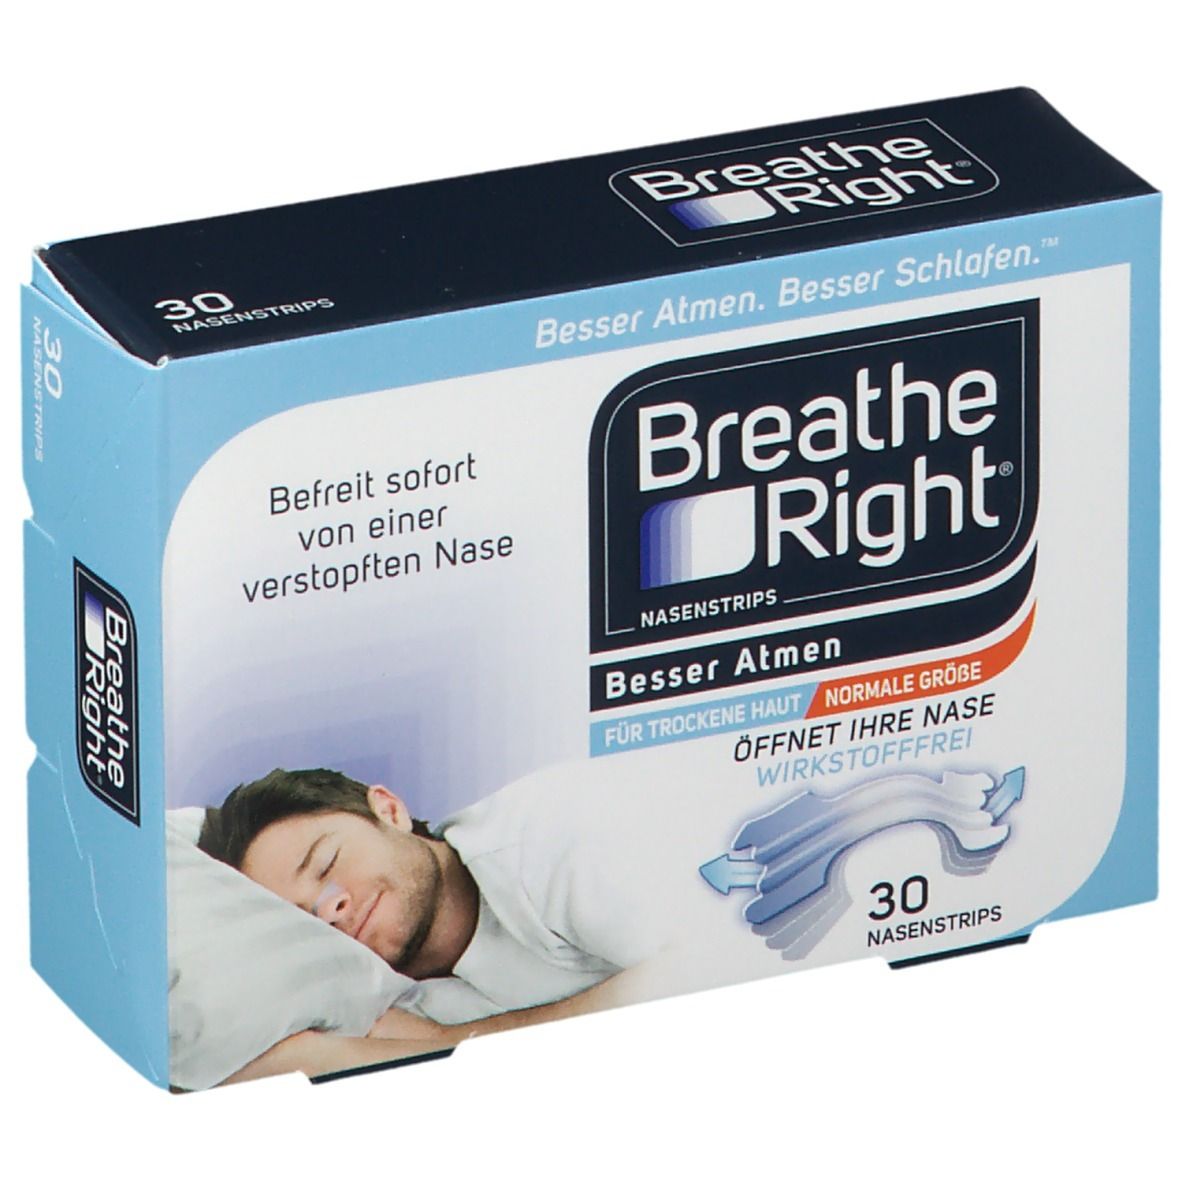 Breathe breathe right nose strips transparent, normal